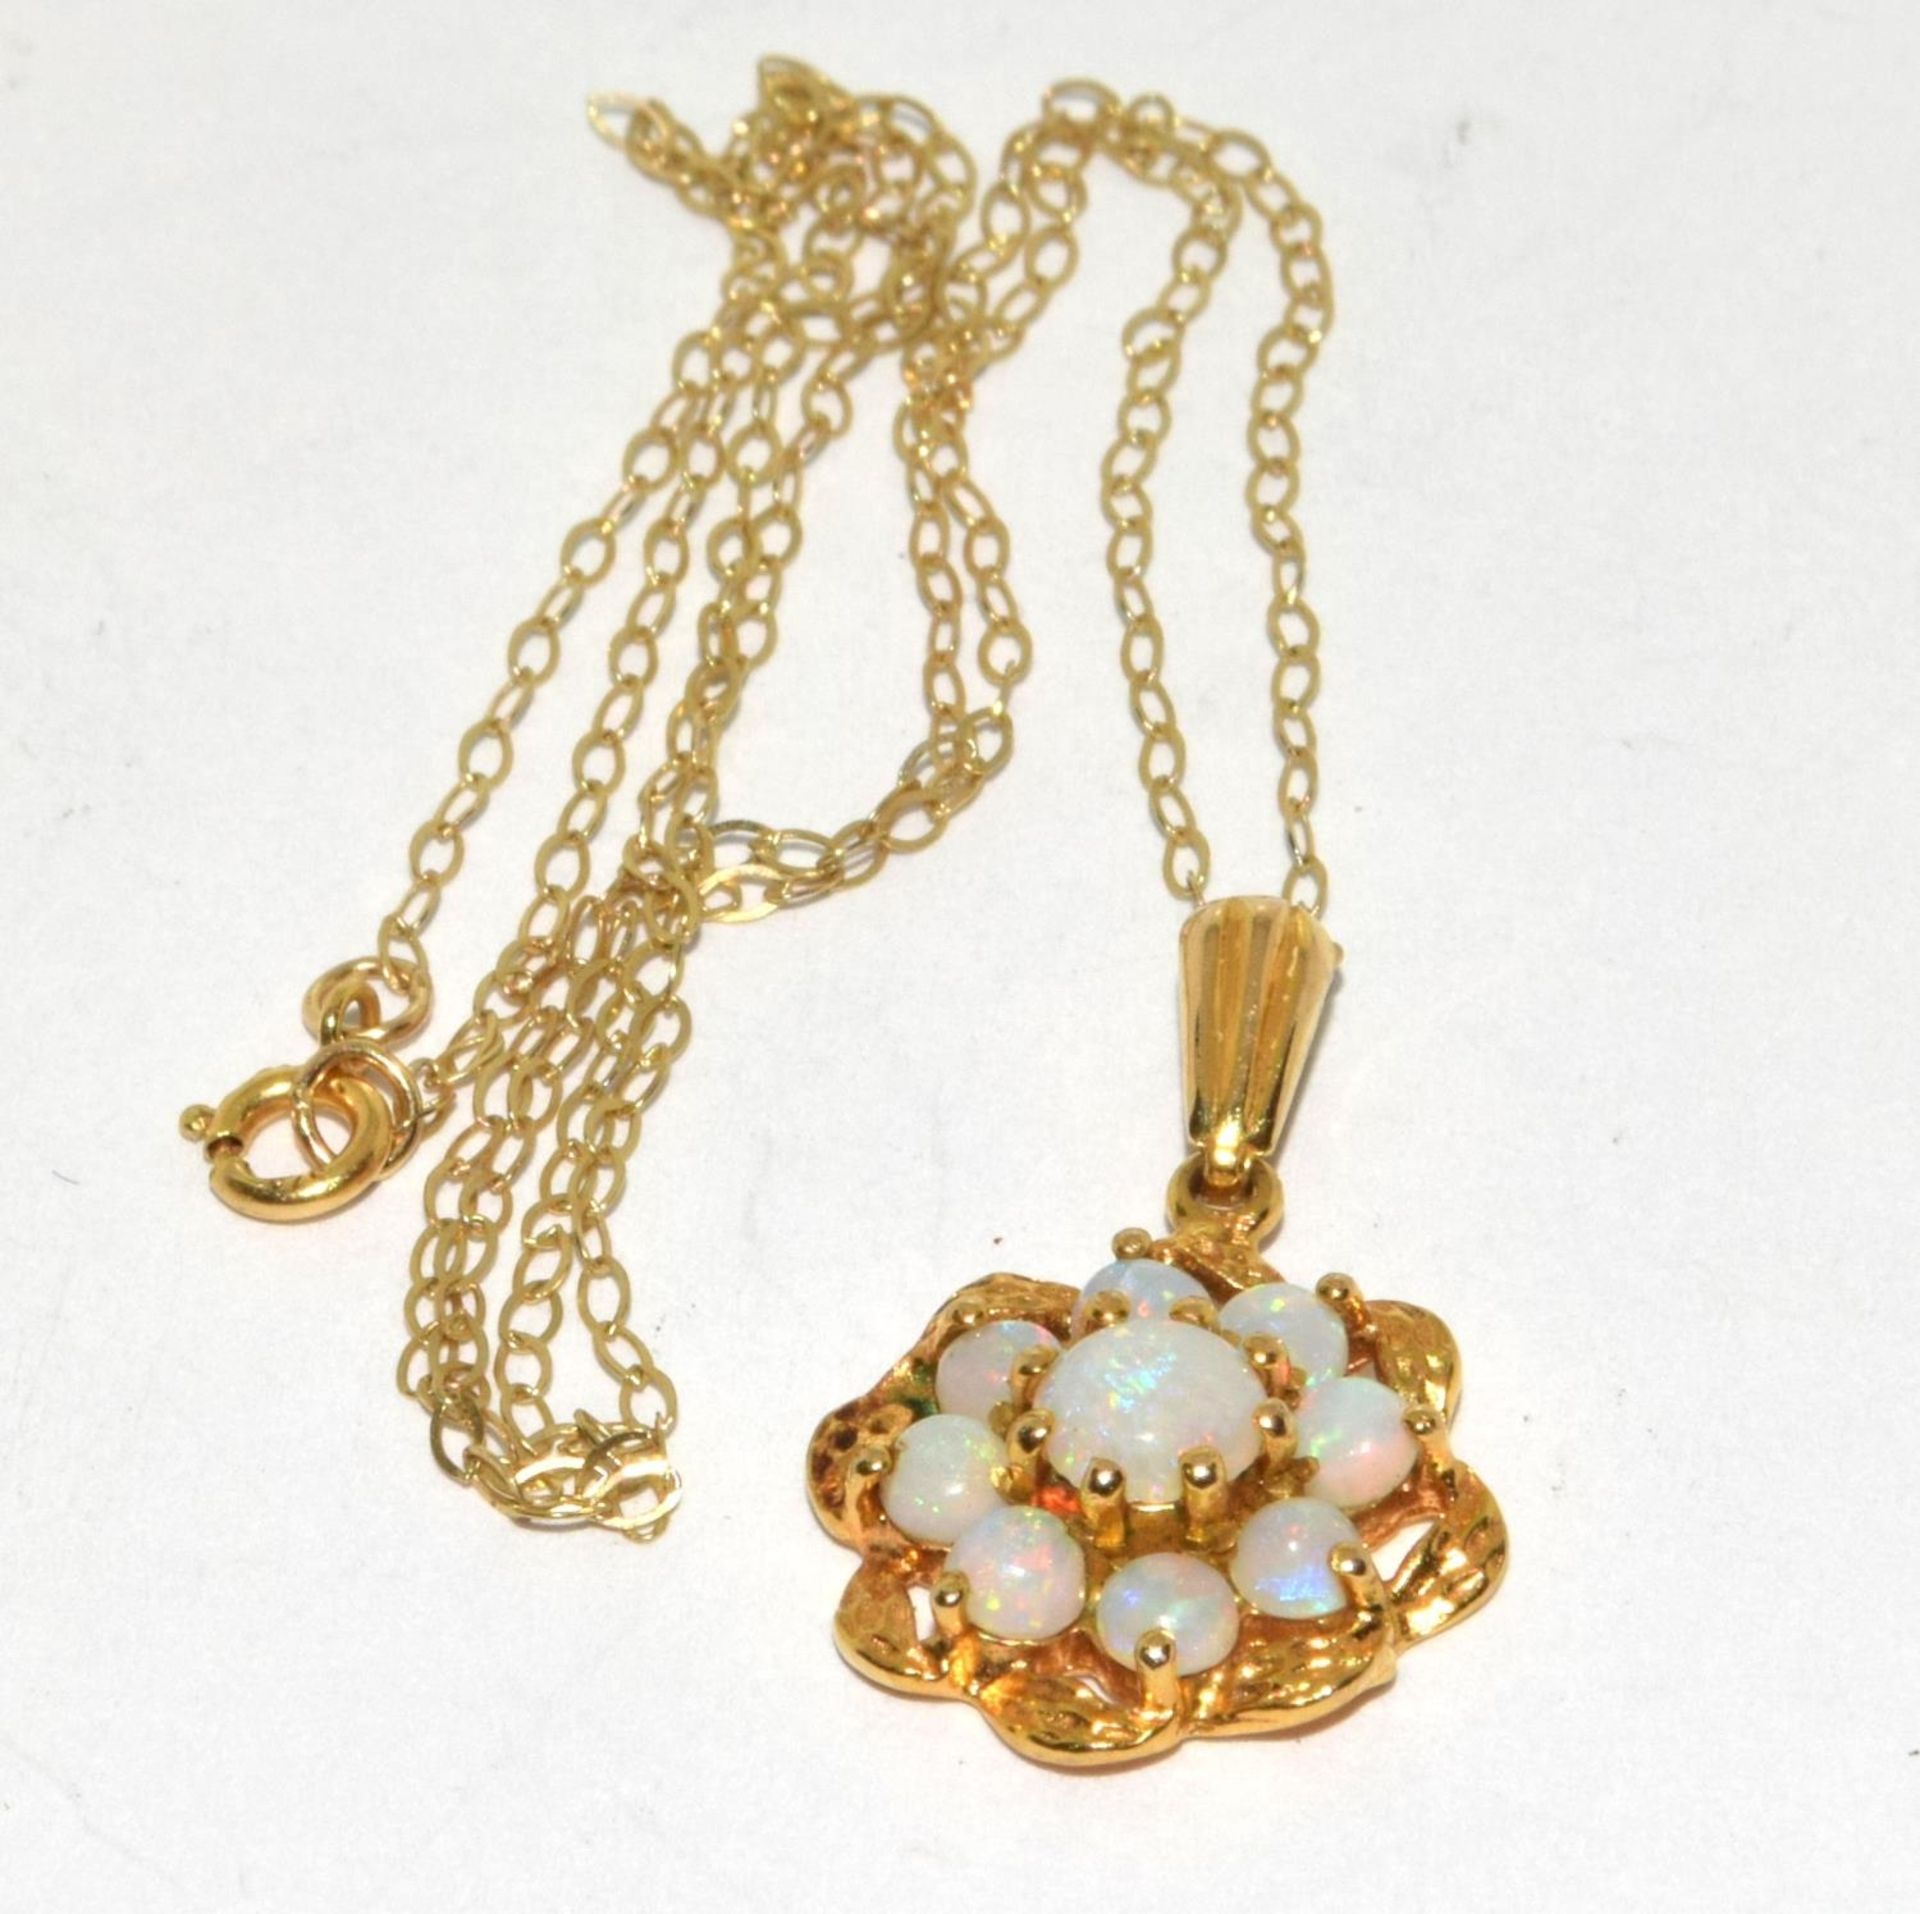 9ct gold ladies Opal cluster pendant necklace with a chain 40cm long